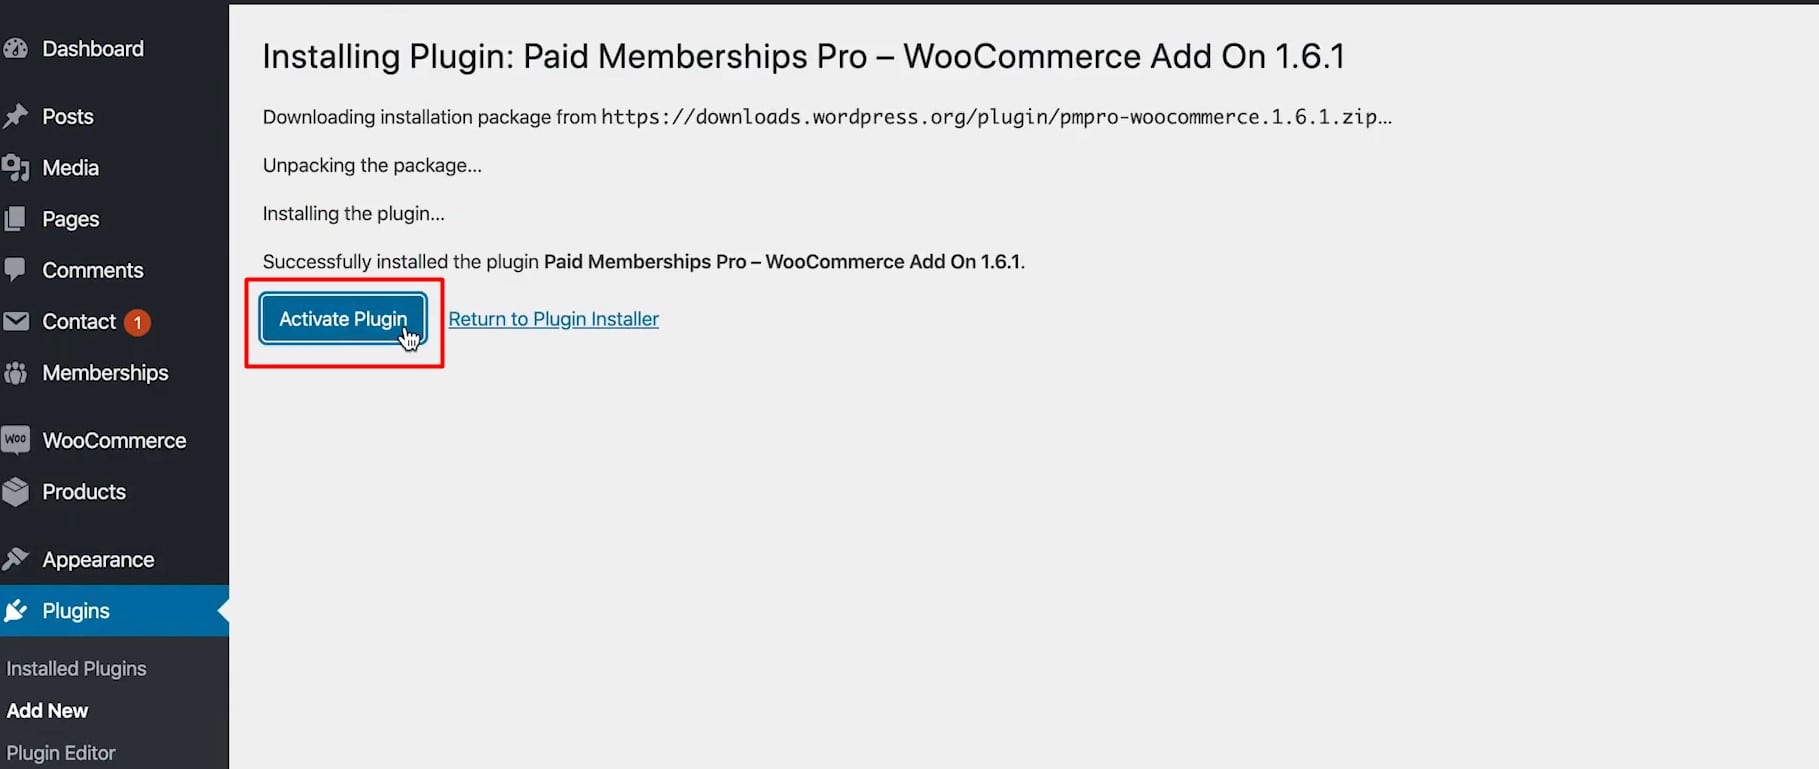 Step 3: Install and activate Paid Memberships Pro - WooCommerce Add On